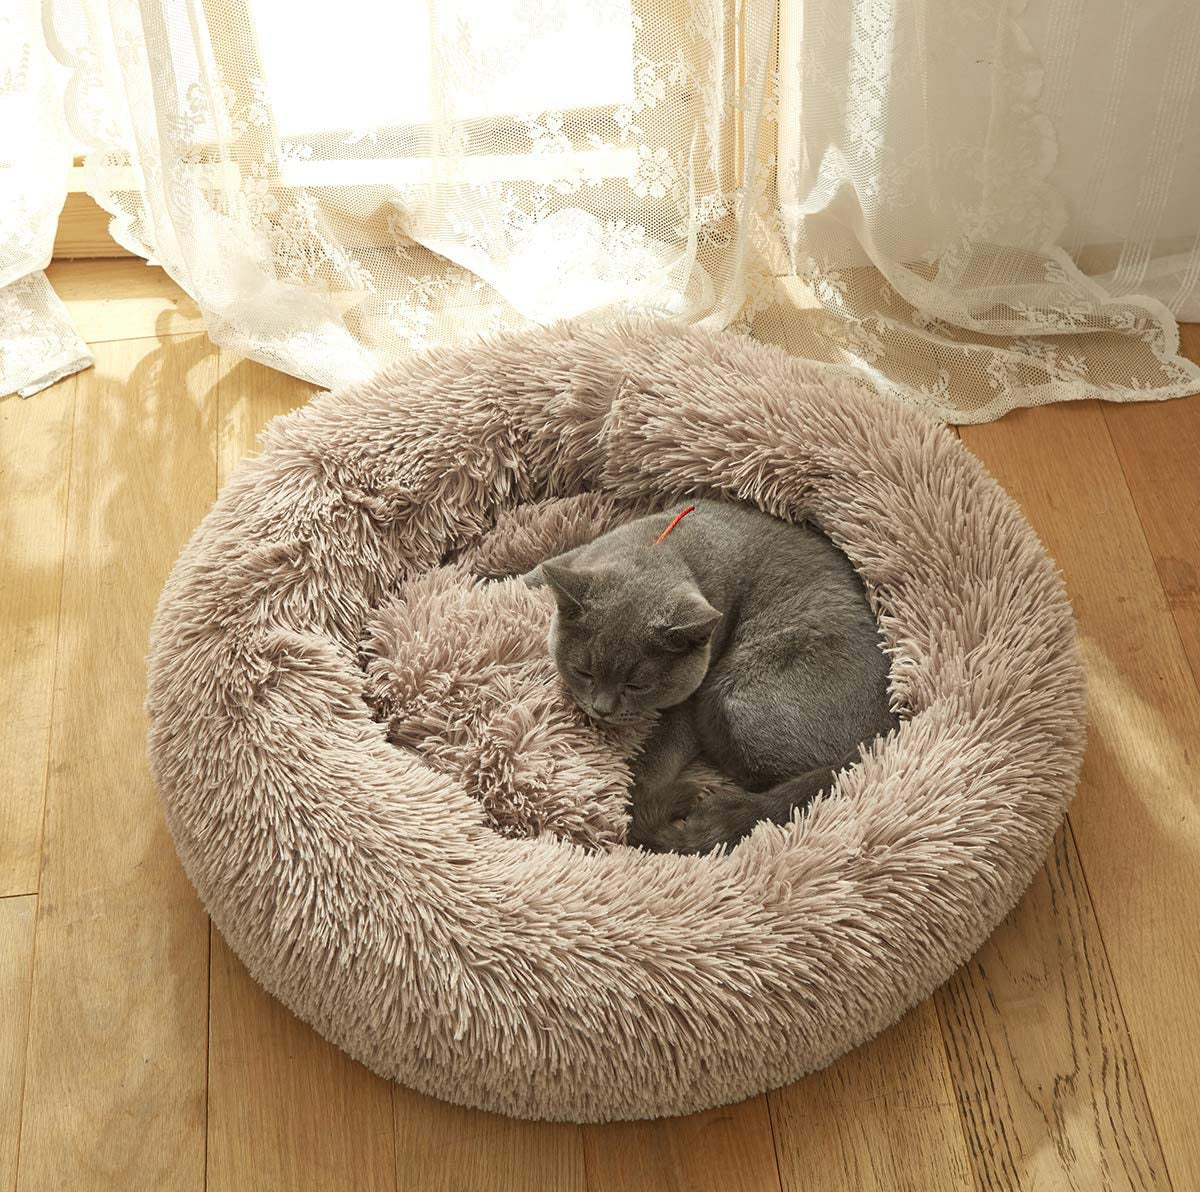 Plush Faux Fur round Pet Dog Bed, Comfortable Fuzzy Donut Cuddler Cushion for Dogs & Cats, Soft Shaggy and Warm for Winter (Brown, 23.6)